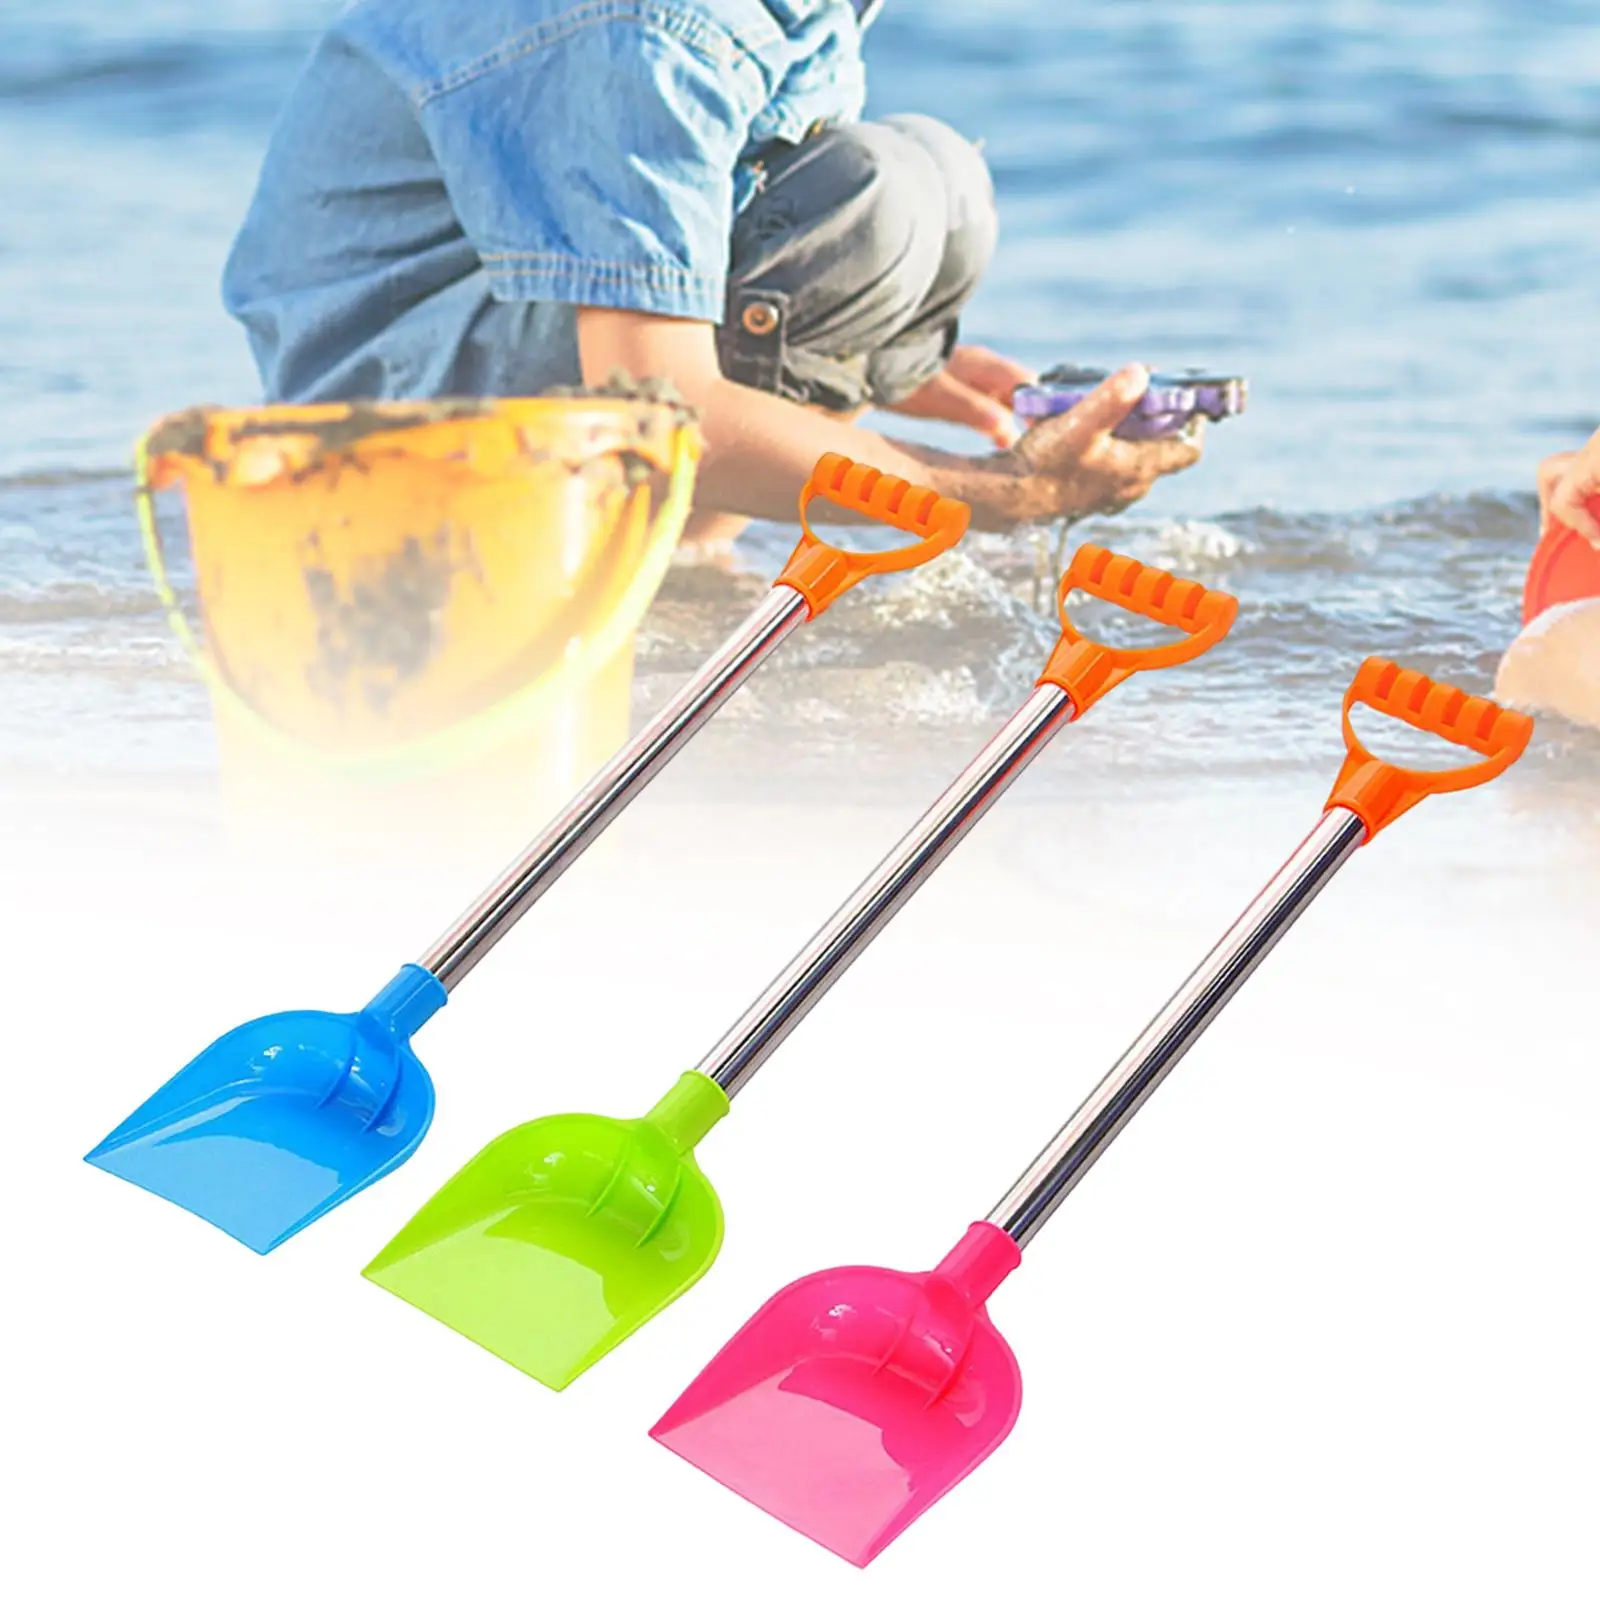 3 Pieces Sand Toys Beach Set Outdoor Toy Gardening Tool Set Durable for Party Favor Birthday Gift Sea Toddlers Children